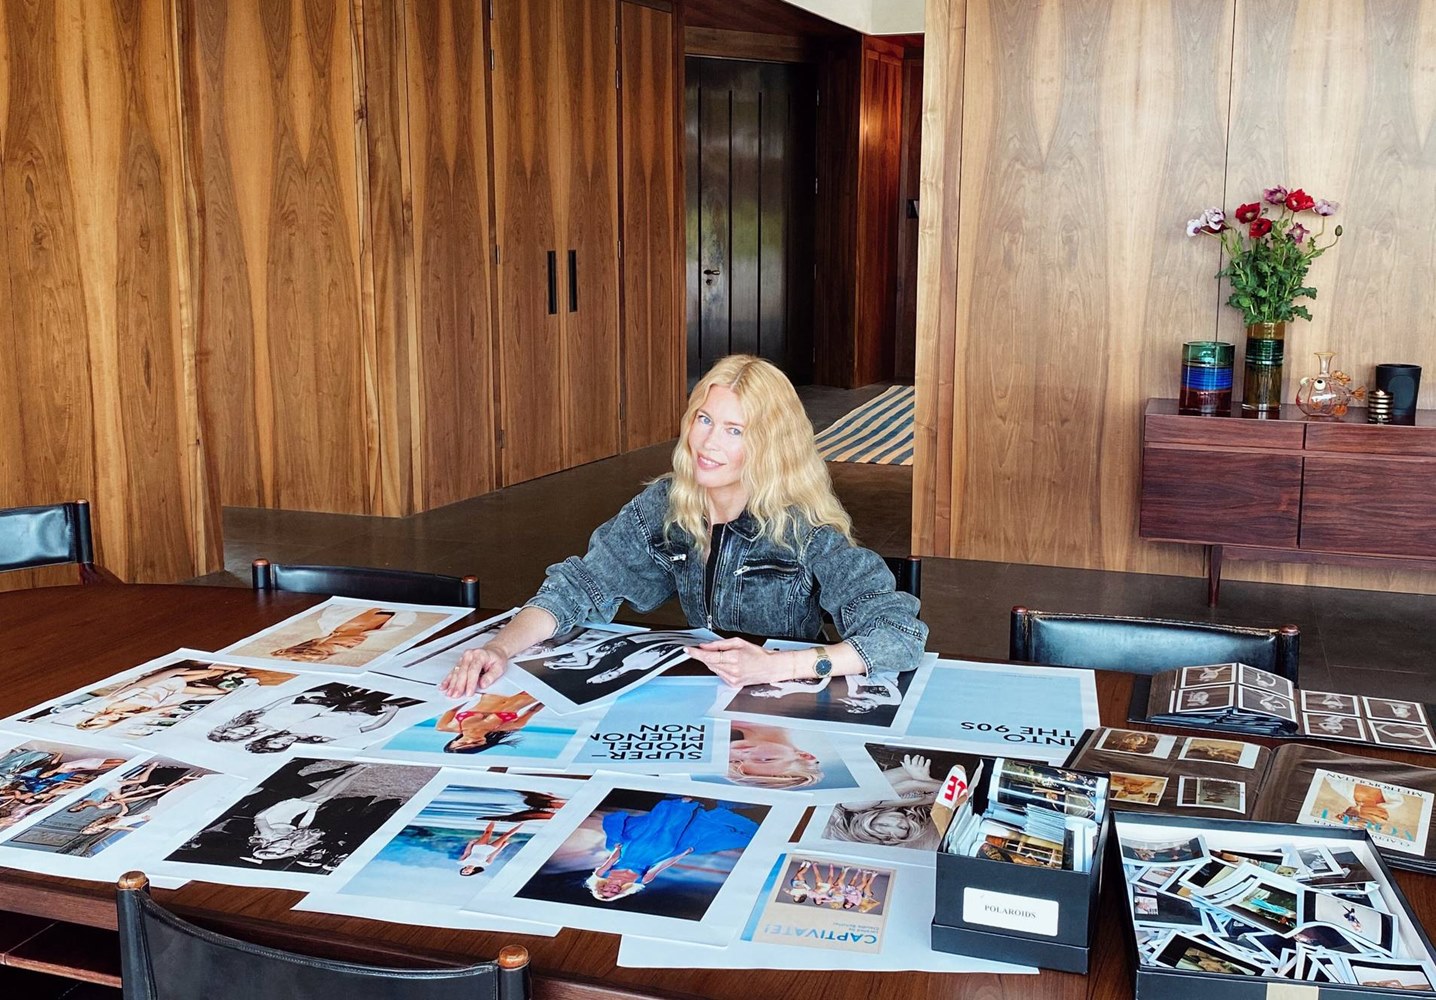 Claudia Schiffer working on the book. Image © Cloudy Film Limited 2021